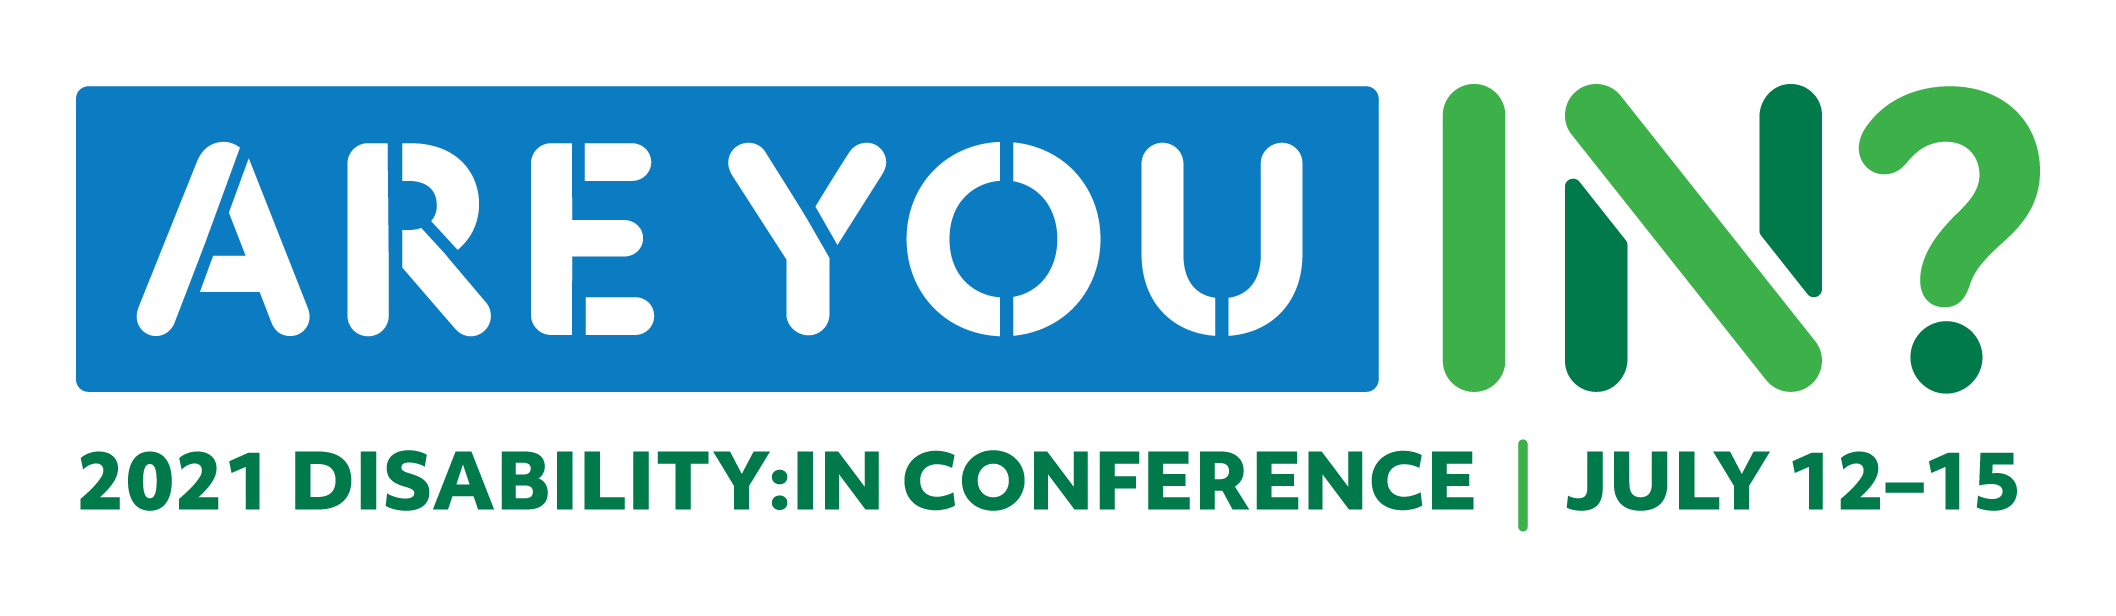 Are You IN? 2021 Disability:IN Conference Logo. July 12-15.